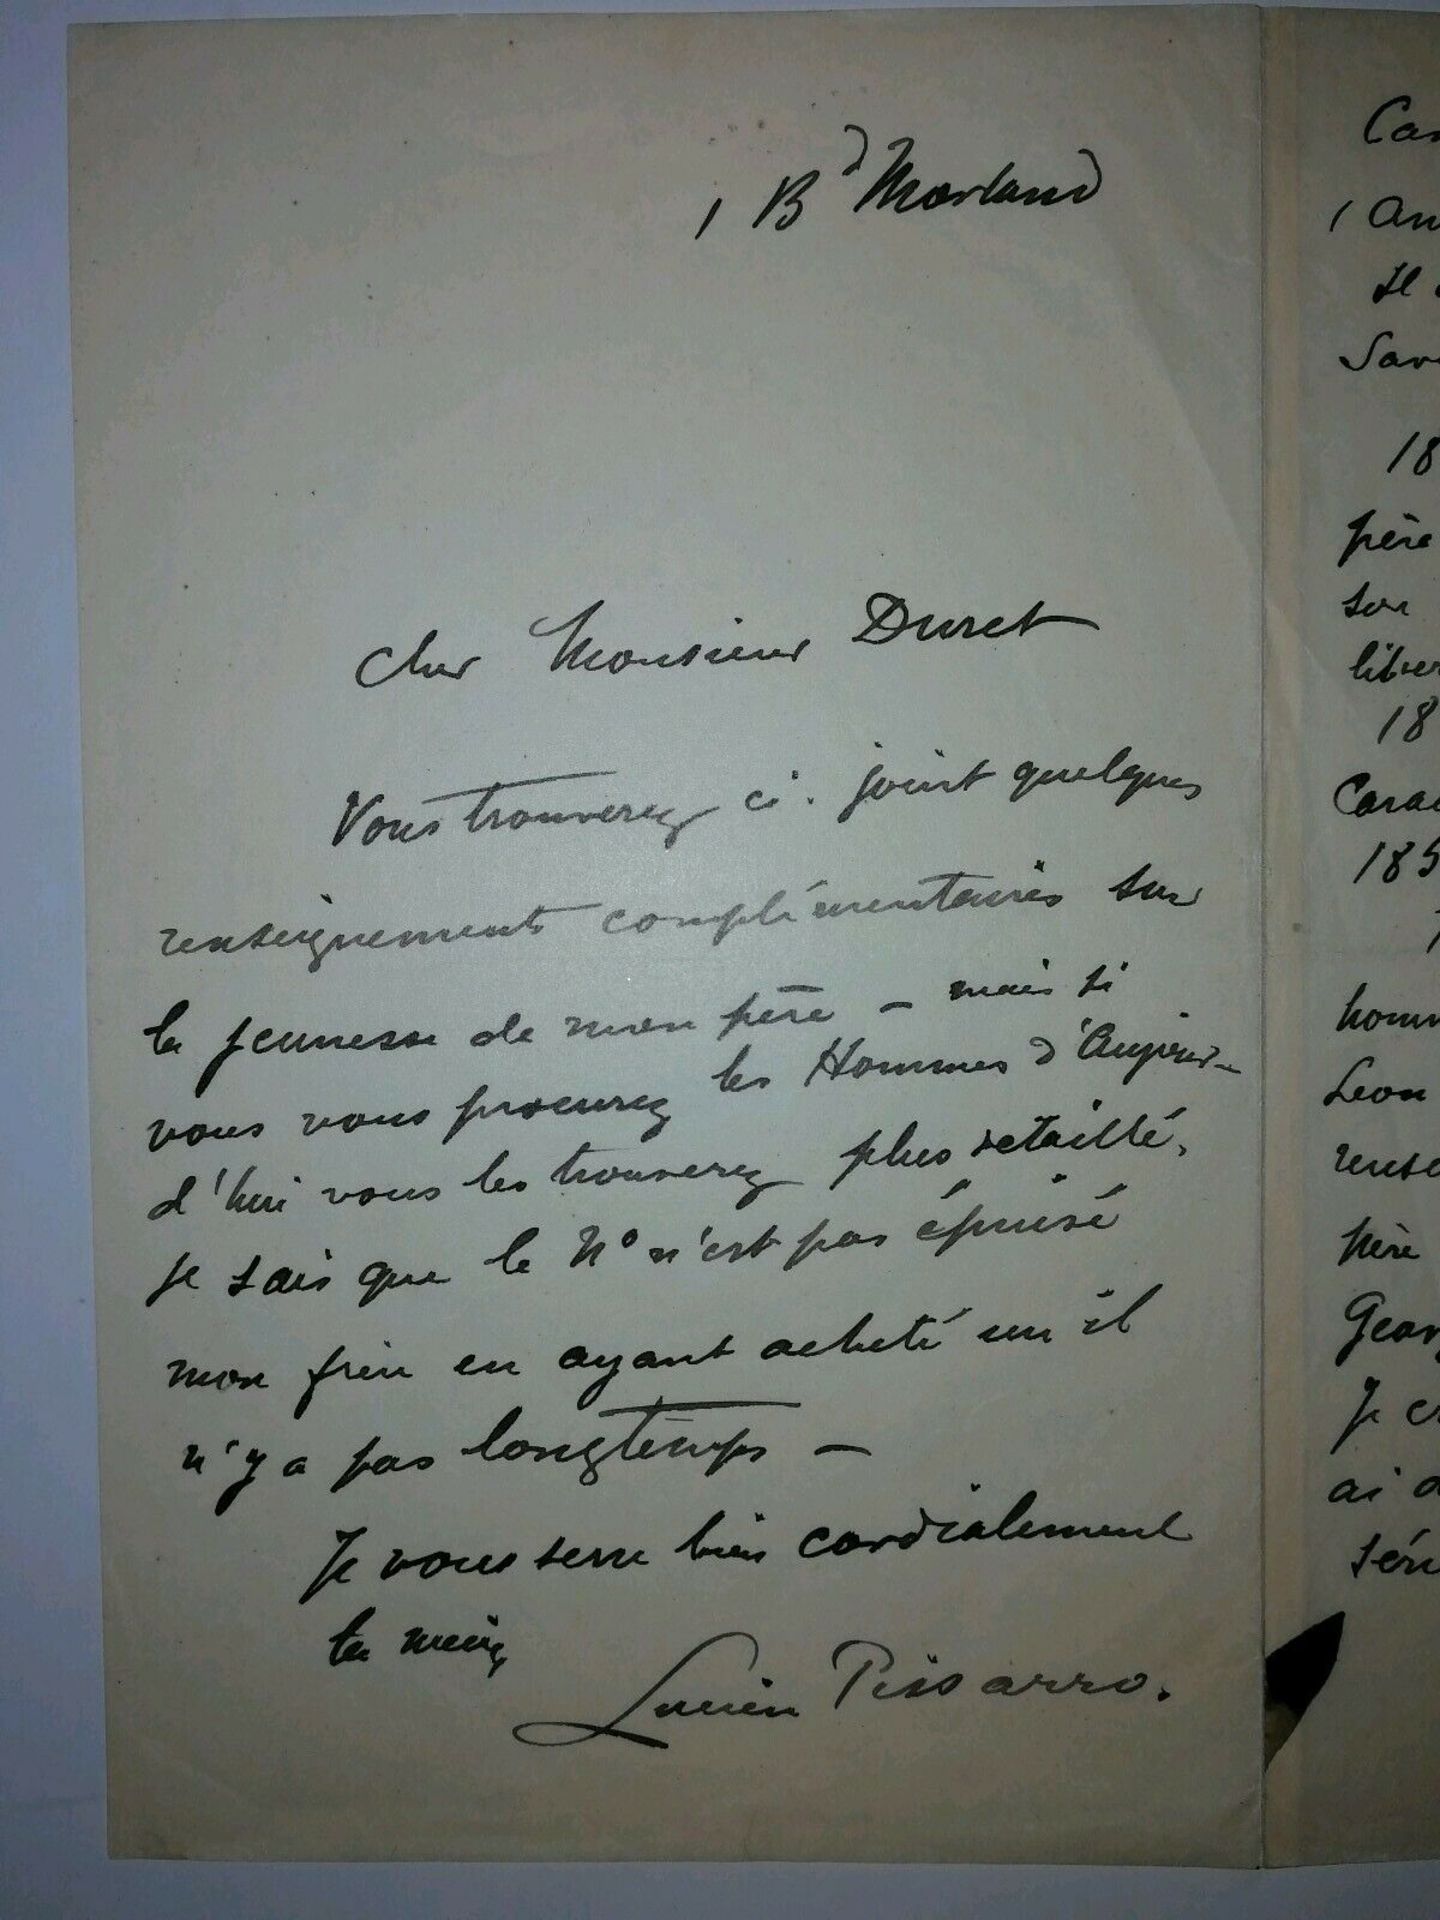 Lucien Pissarro French Painter Autograph letter about Camille Pissarro - Image 3 of 3